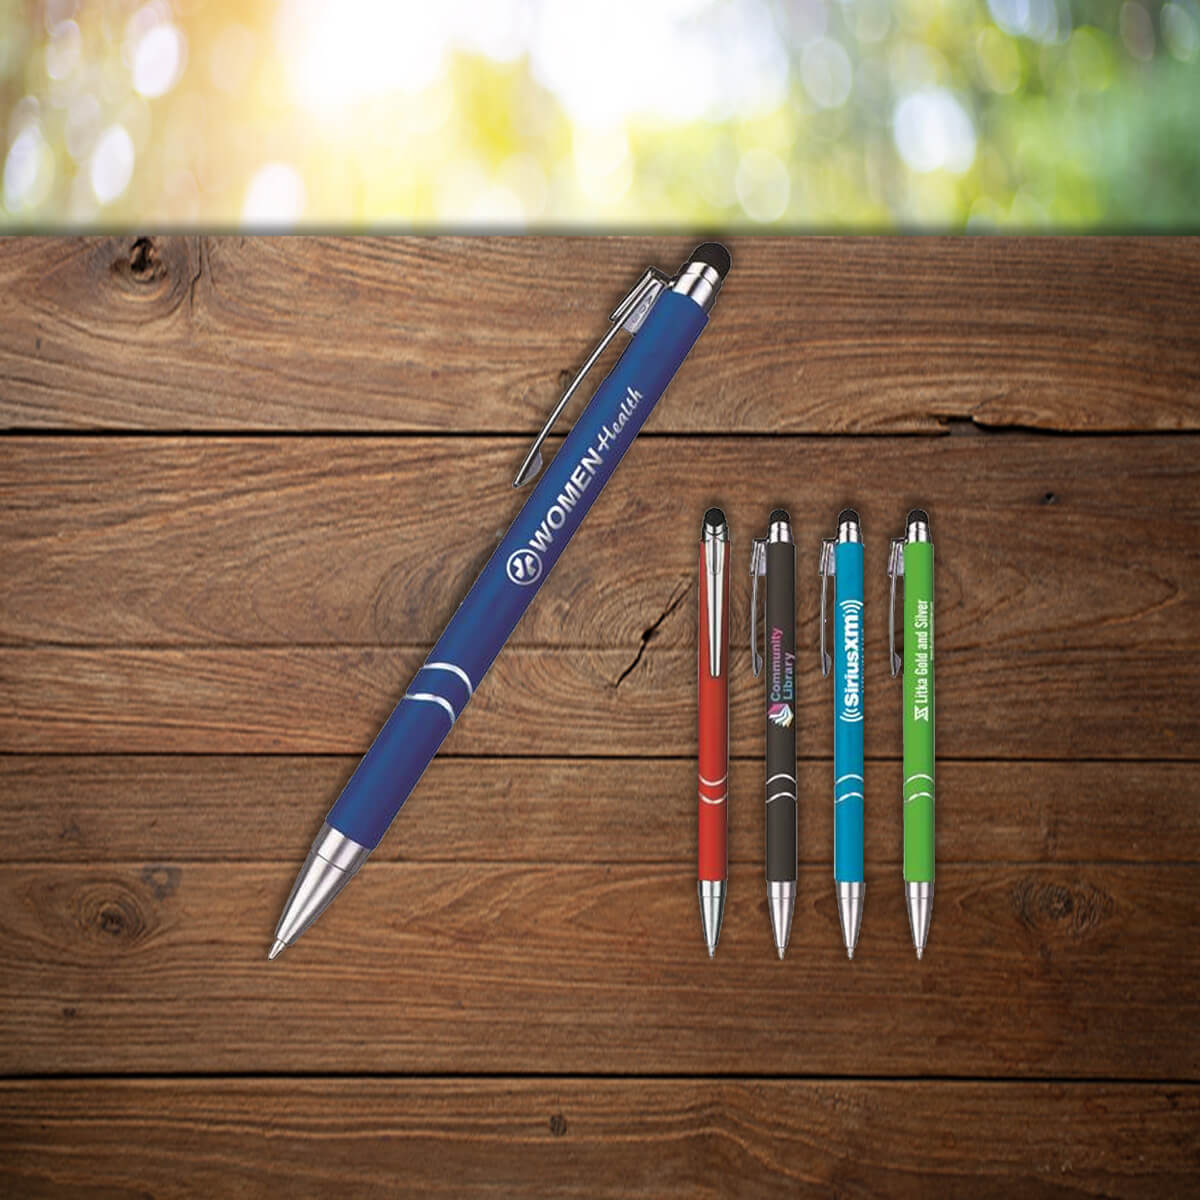 Color variety shown of metal pens with branding and stylus end promotional writing implements by curative printing